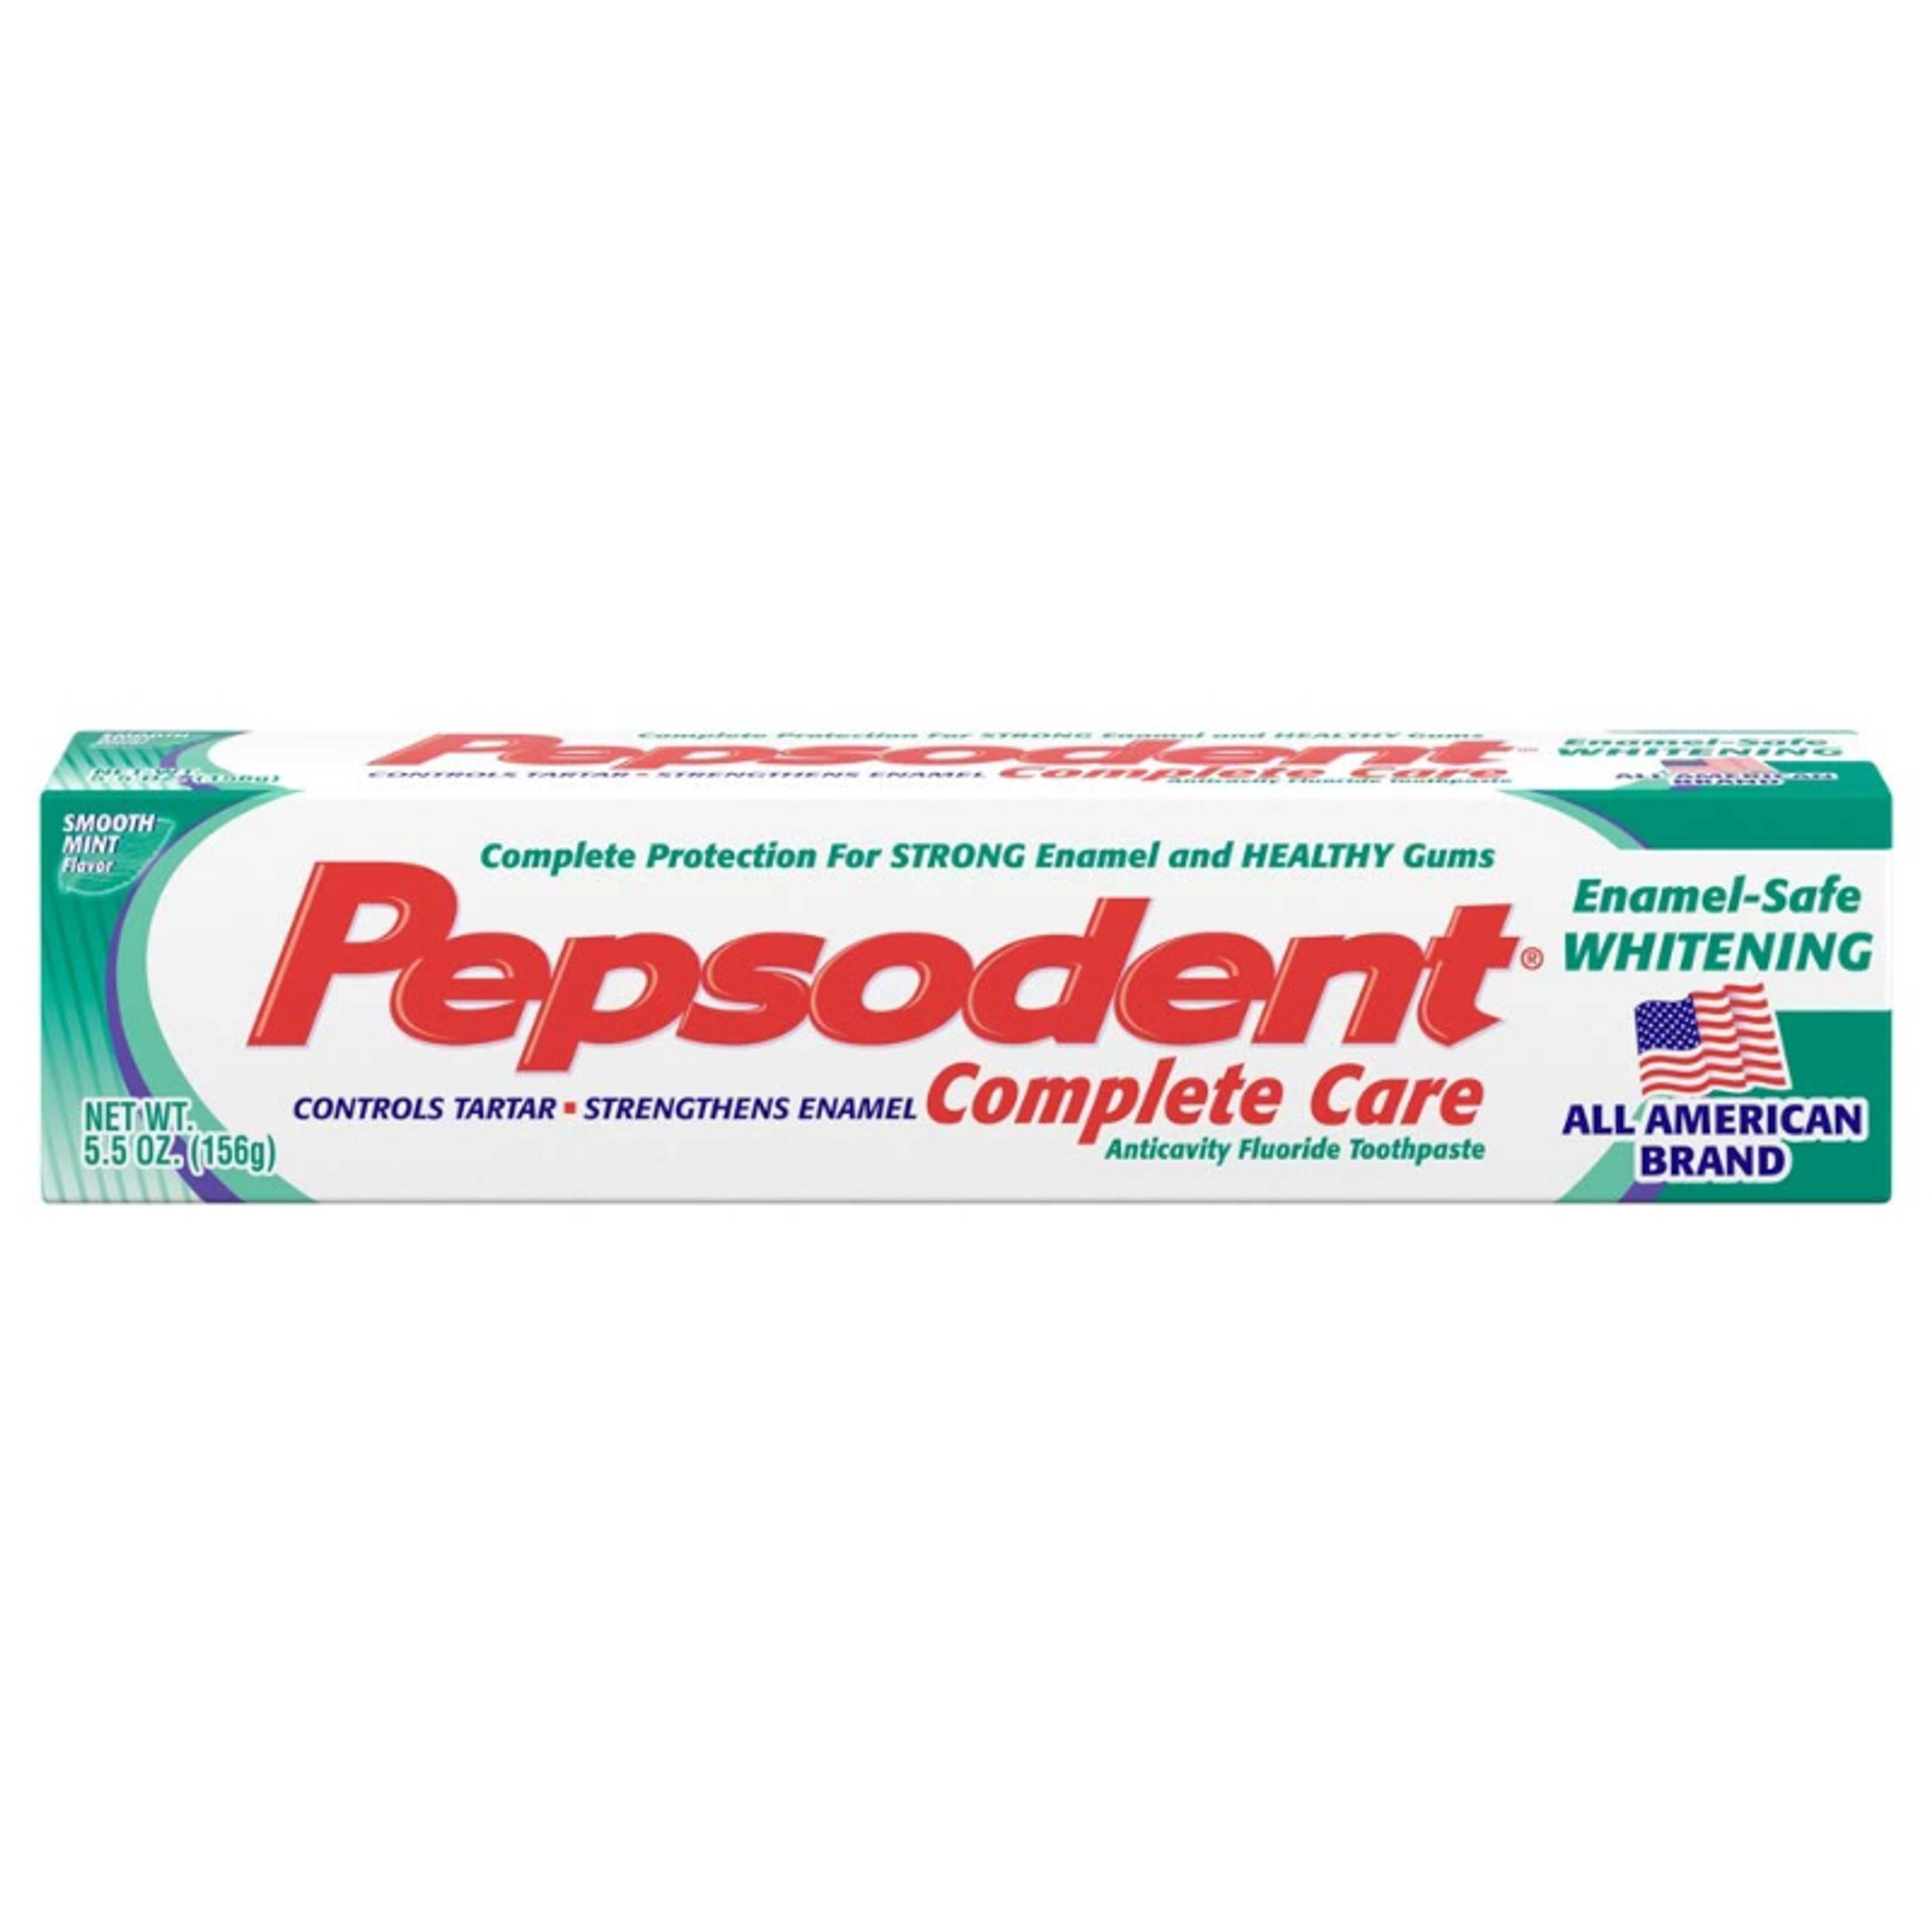 PEPSODENT TOOTH PASTE COMPLETE CARE SAFE WHITENING 156G (USA Imported)